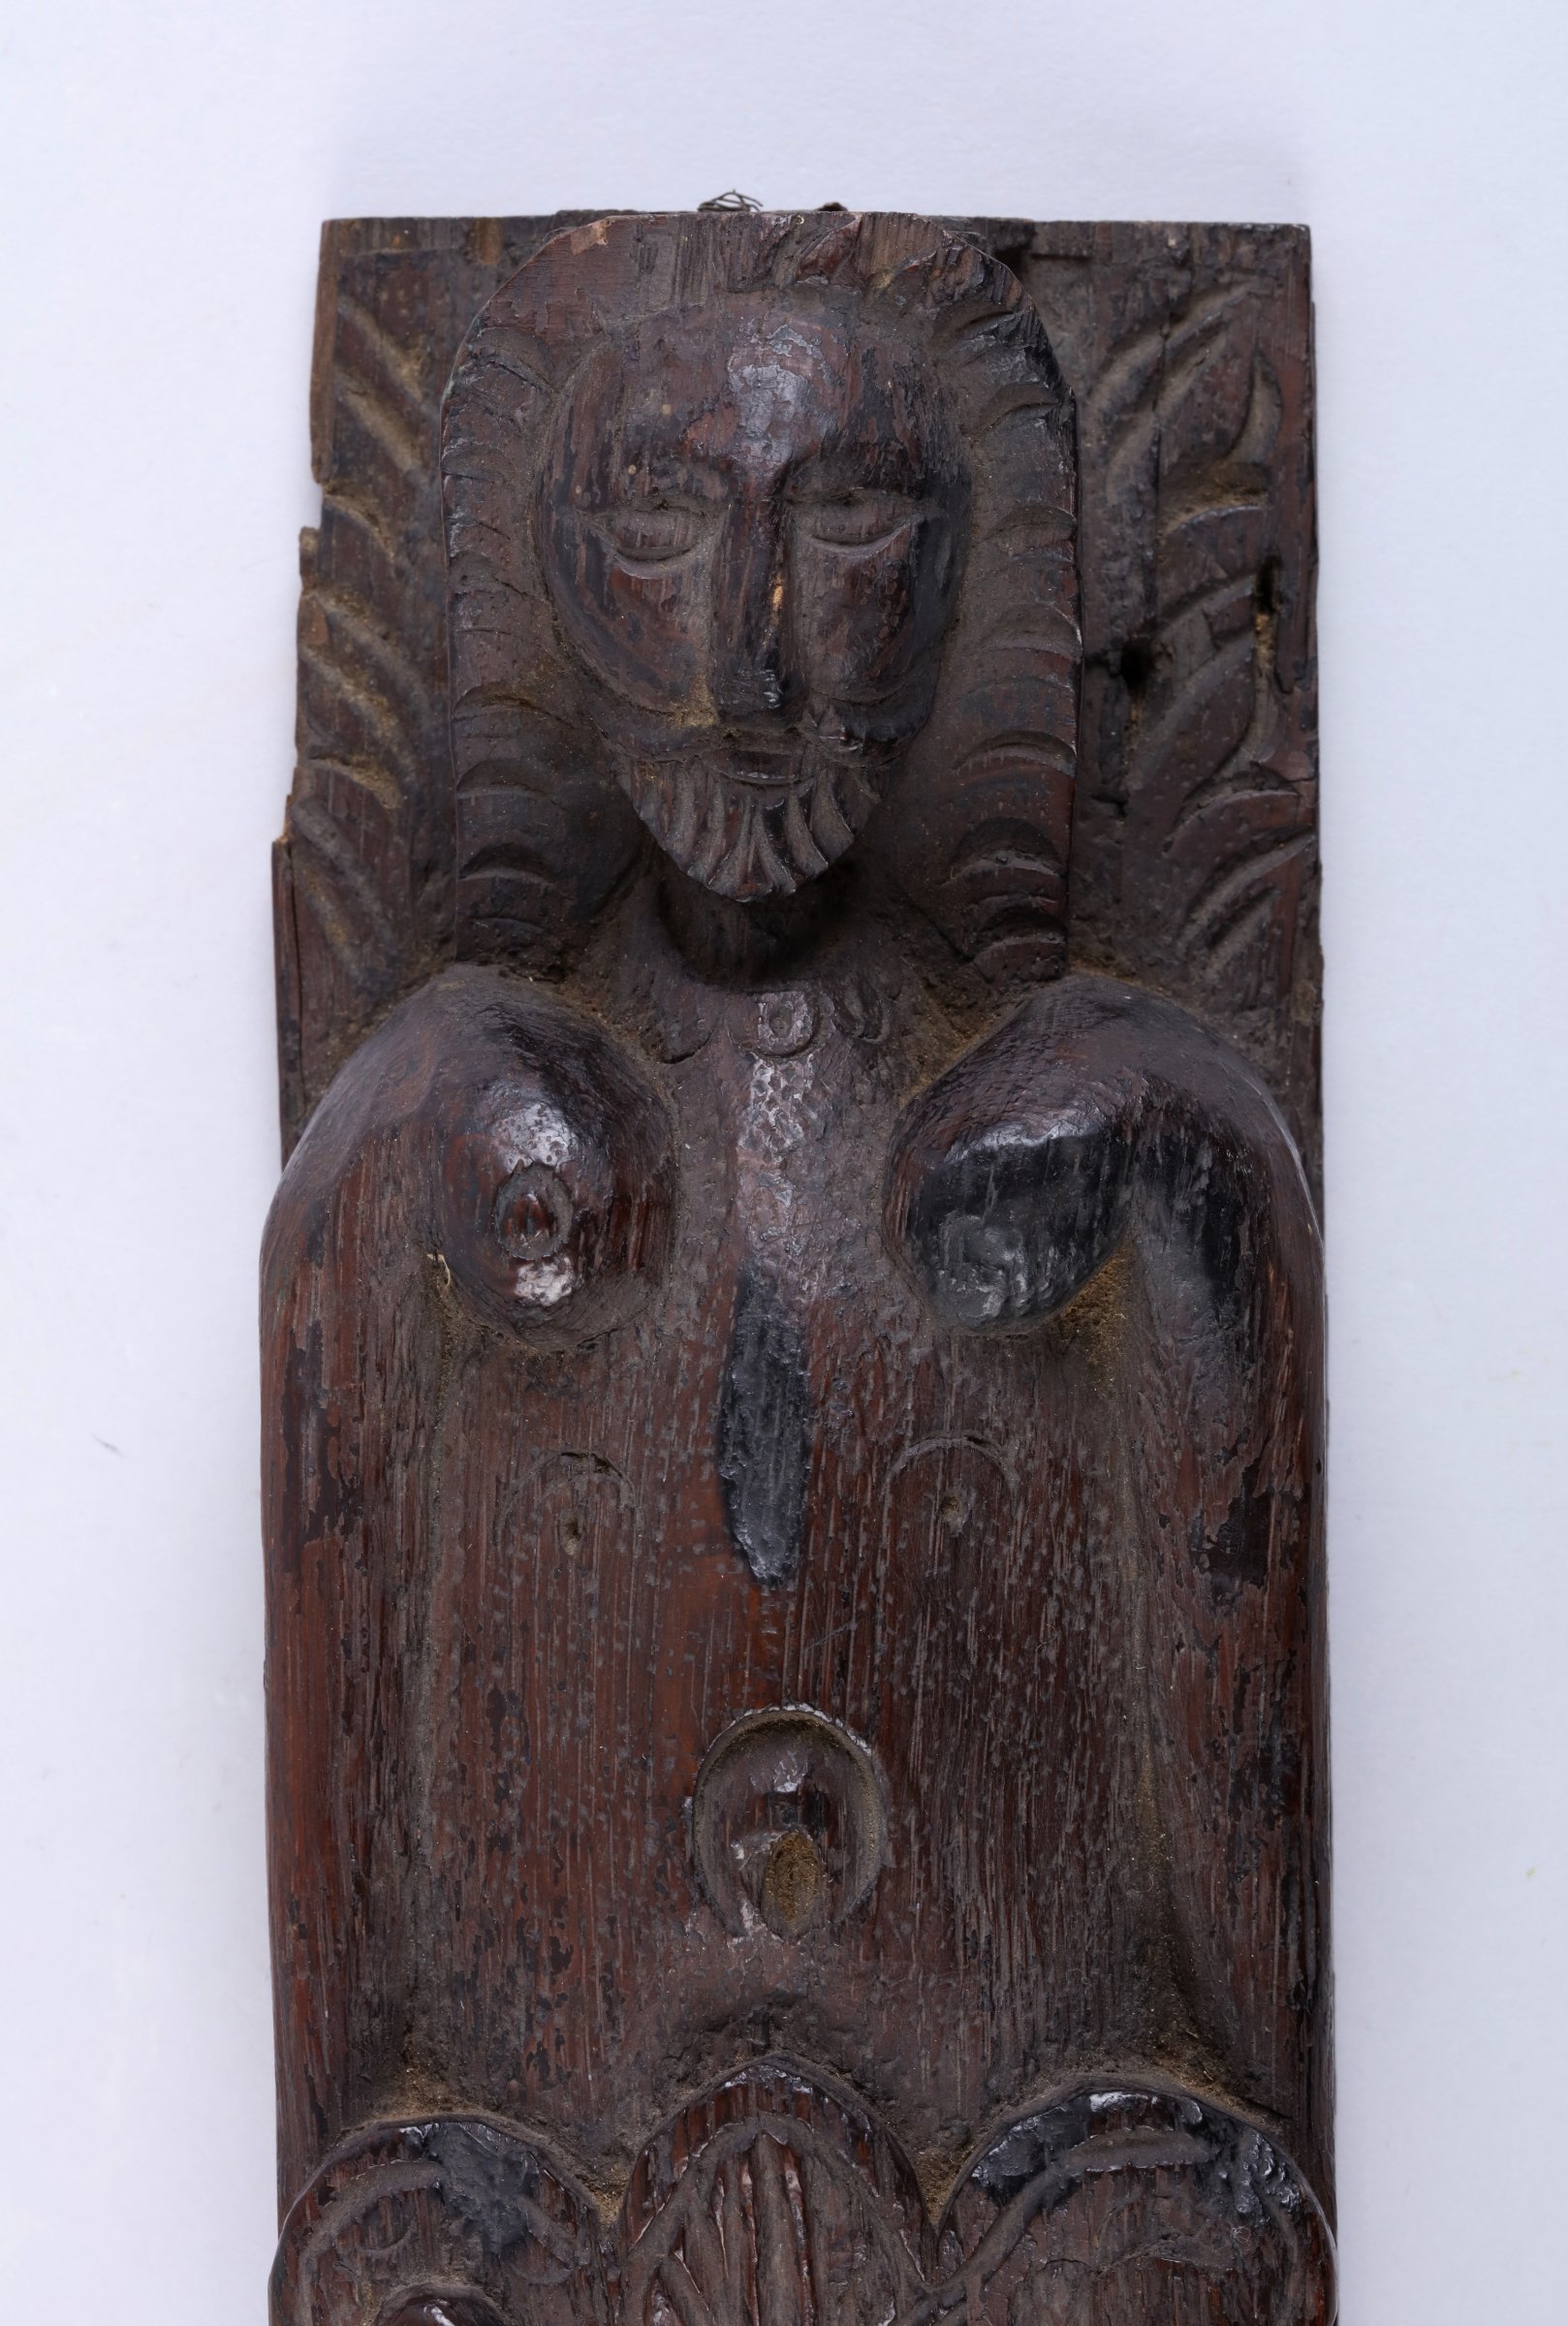 A carved wooden figure, bearded with breasts. Lower half of the body covered in leaf-like motif.